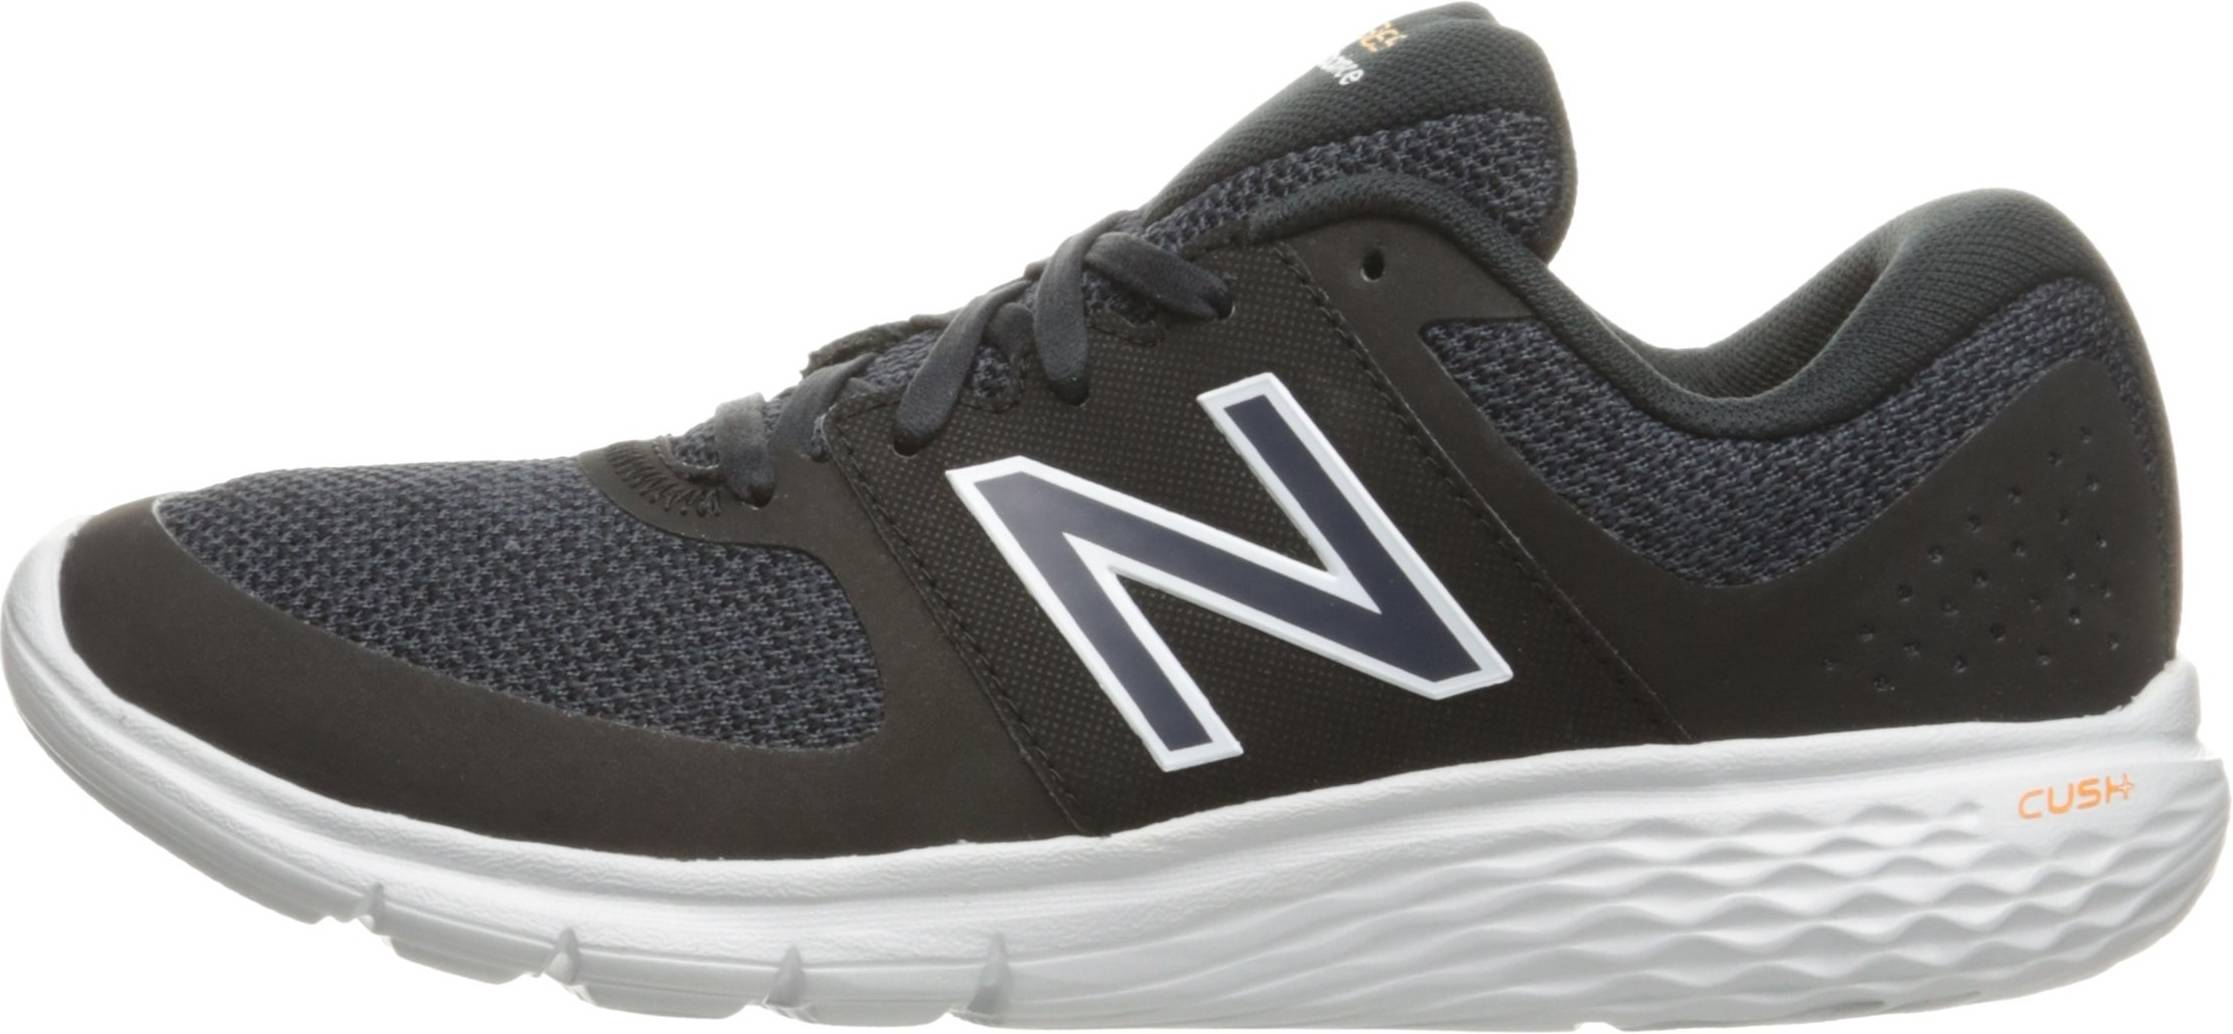 Only $53 + Review of New Balance 365 